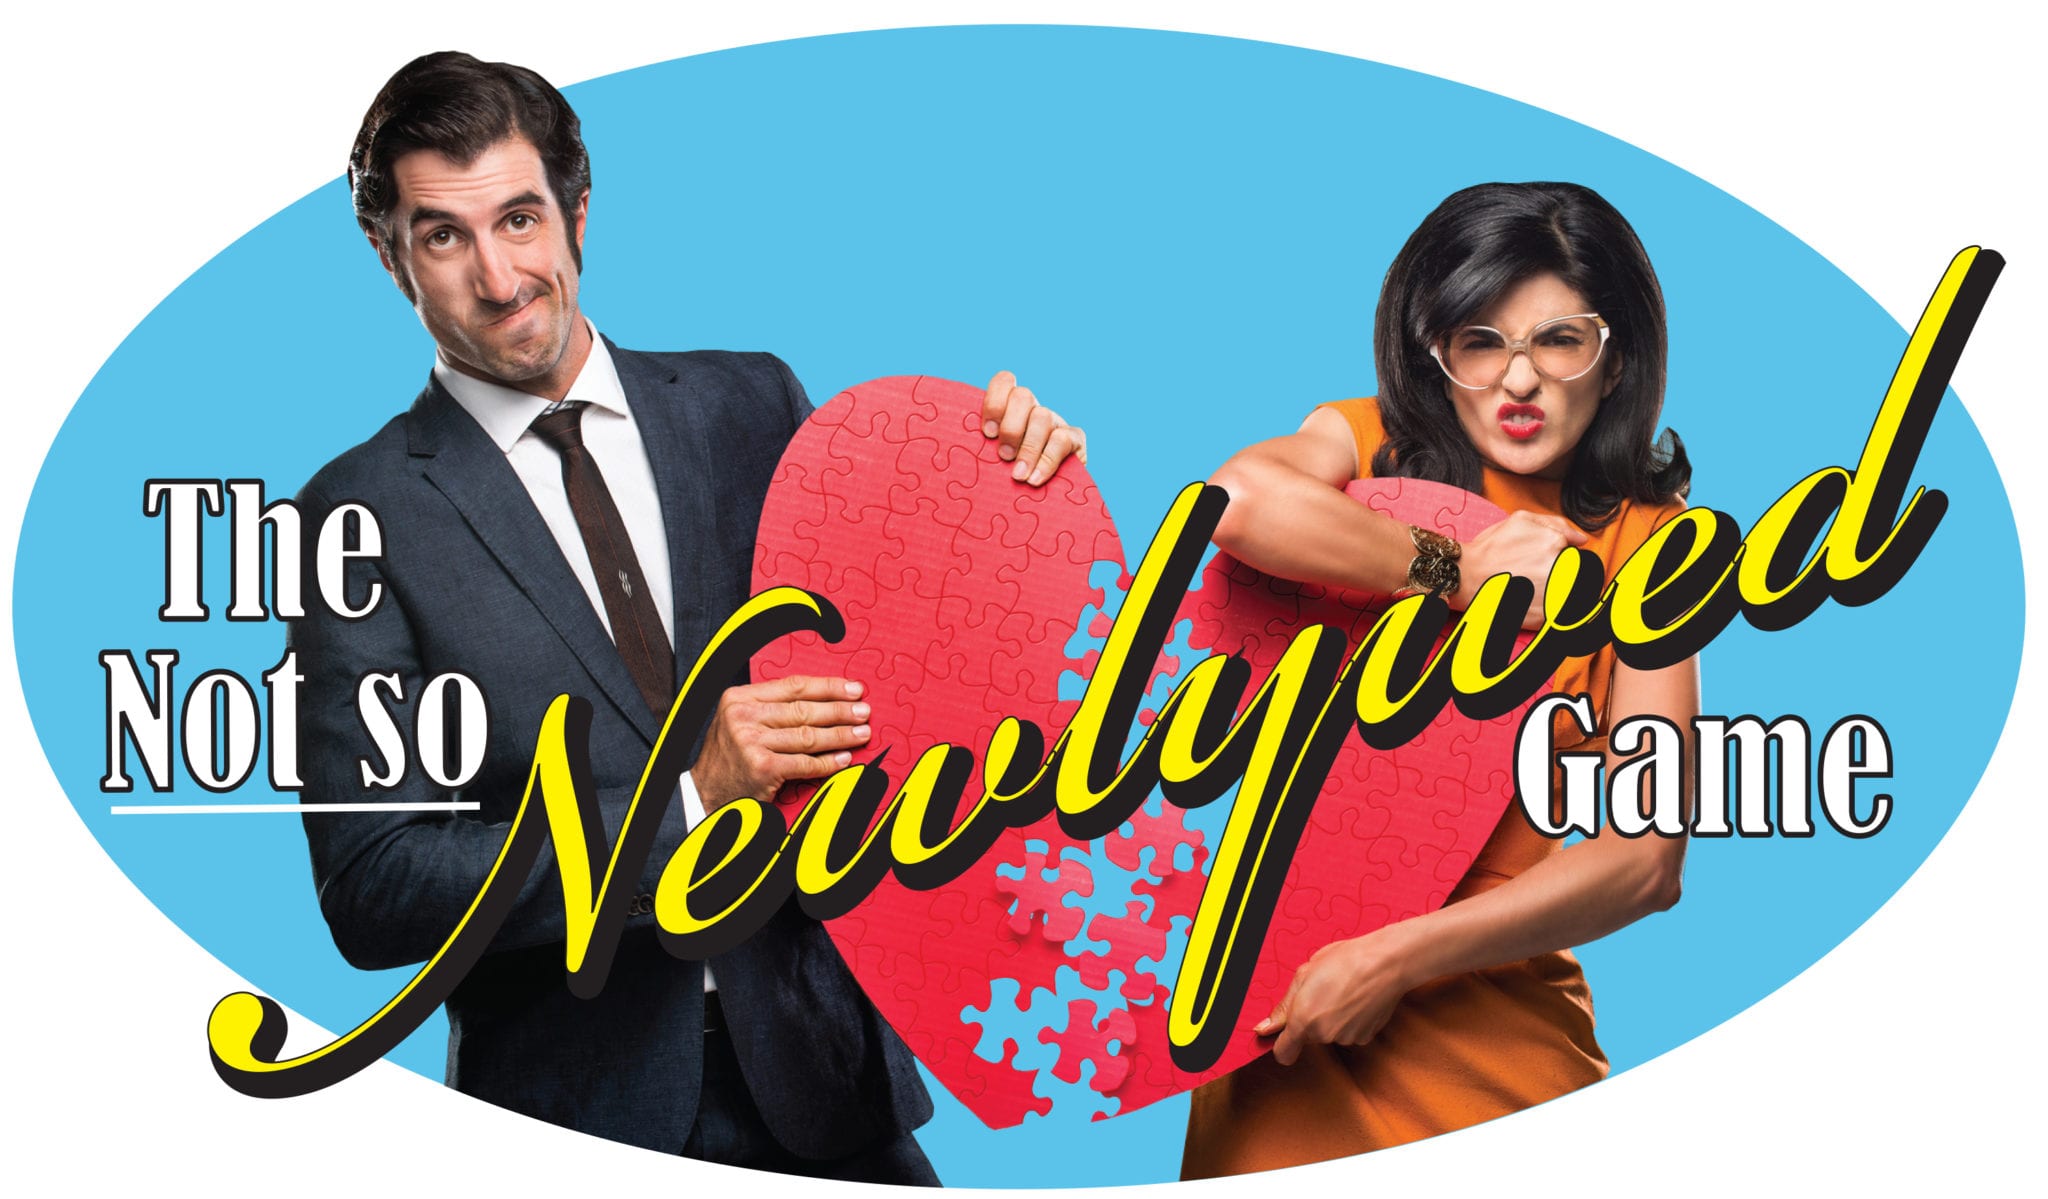 speakeasy-debuting-not-so-newlywed-game-show-quad-cities